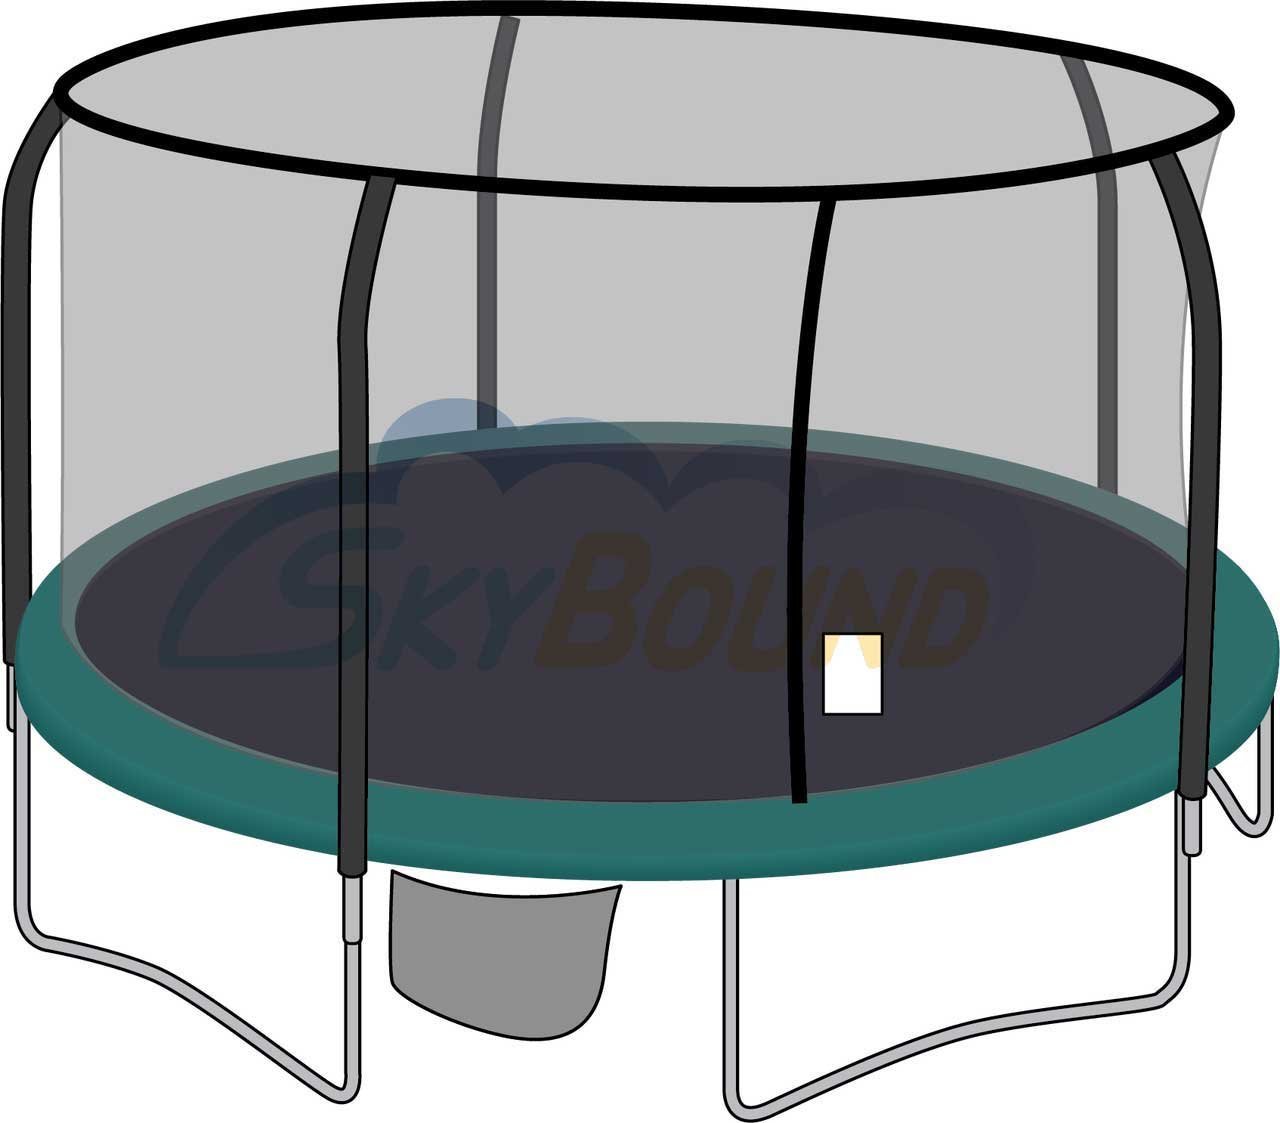 SkyBound 15-Foot Trampoline Net - Fits 5 Poles using a Top Ring - image 1 of 8